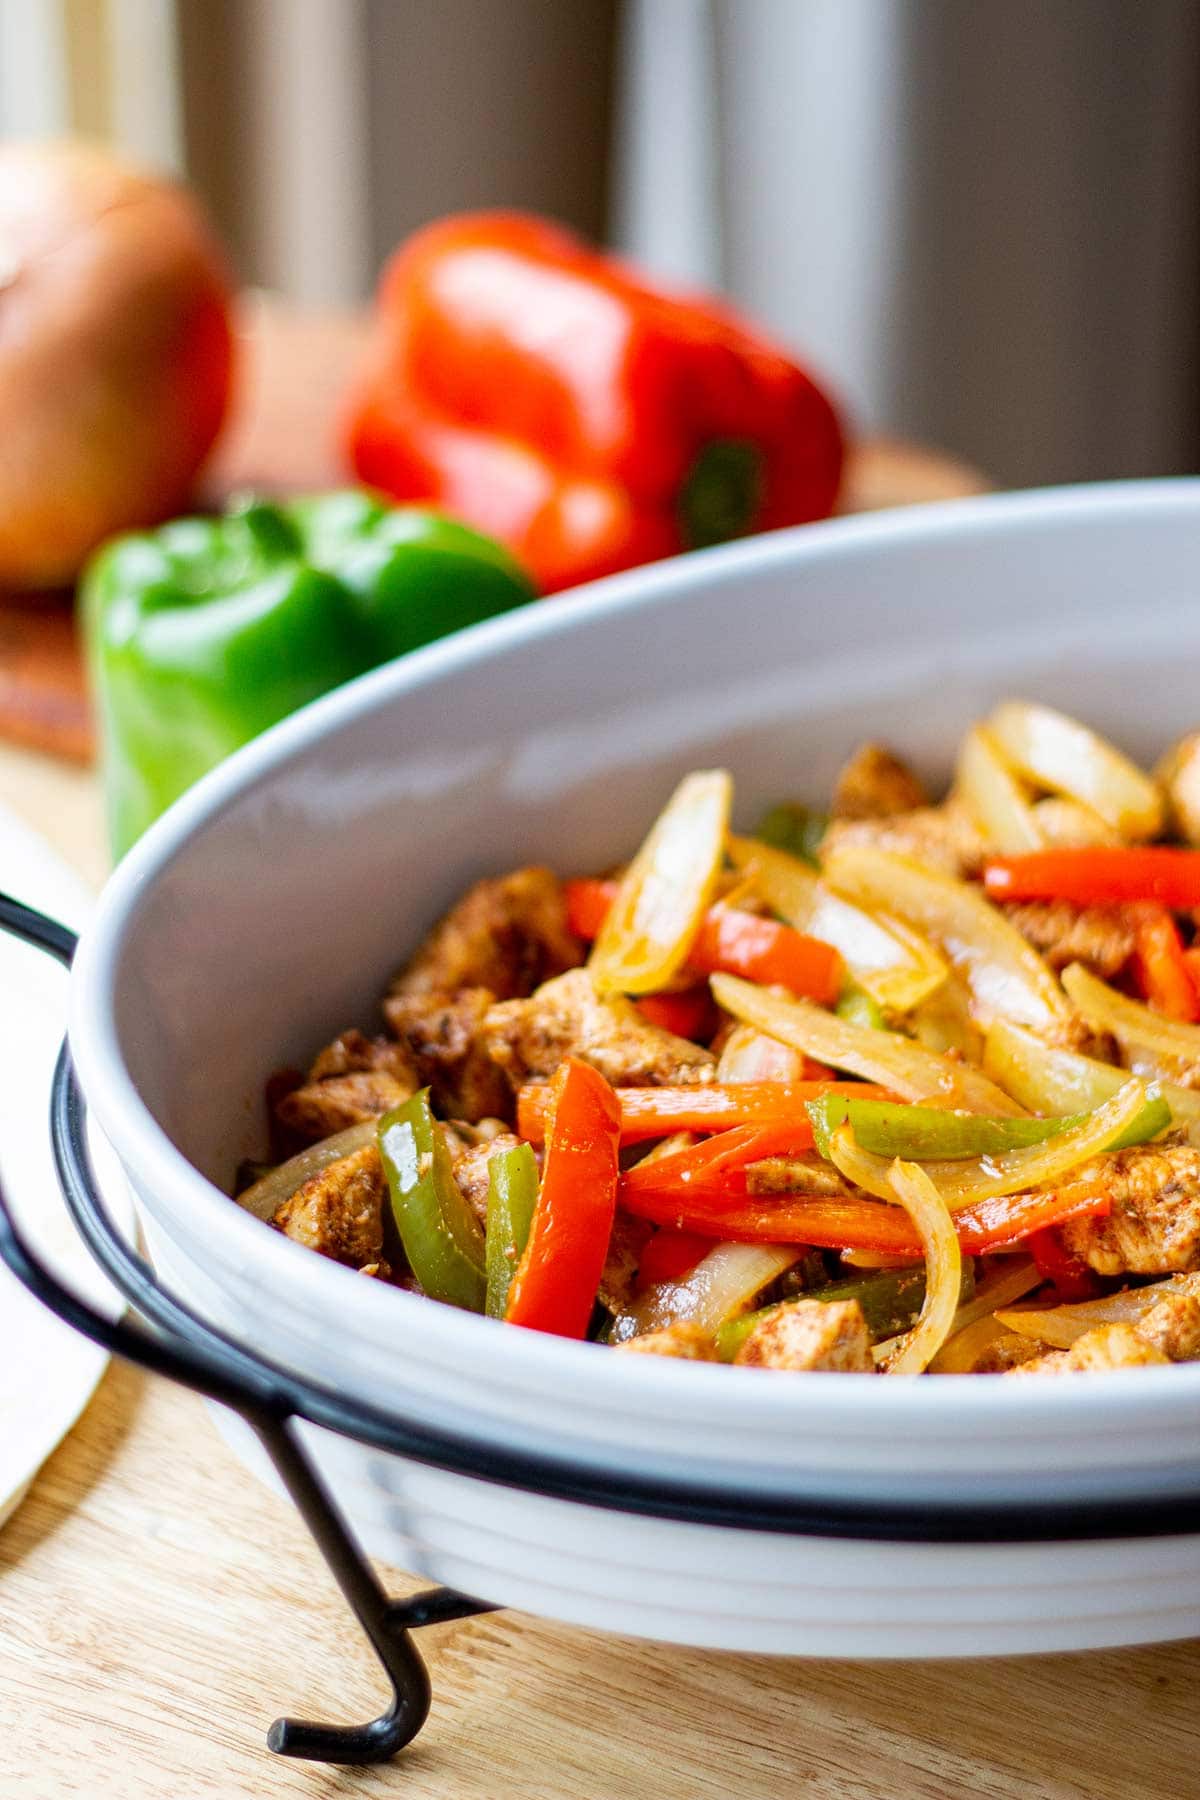 freezer fajitas with chicken, peppers and onions, cooked in serving bowl on table.